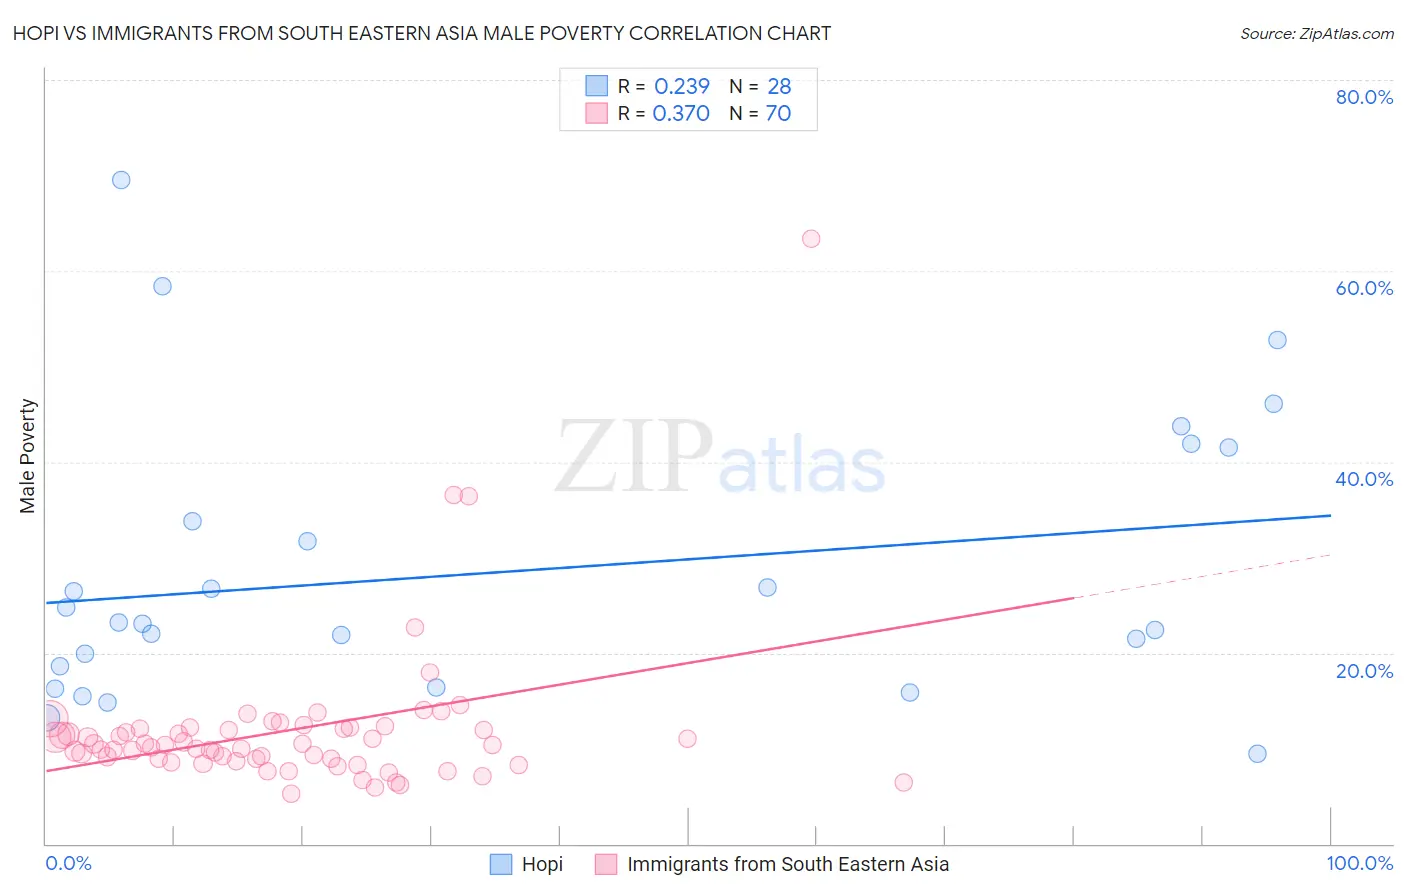 Hopi vs Immigrants from South Eastern Asia Male Poverty